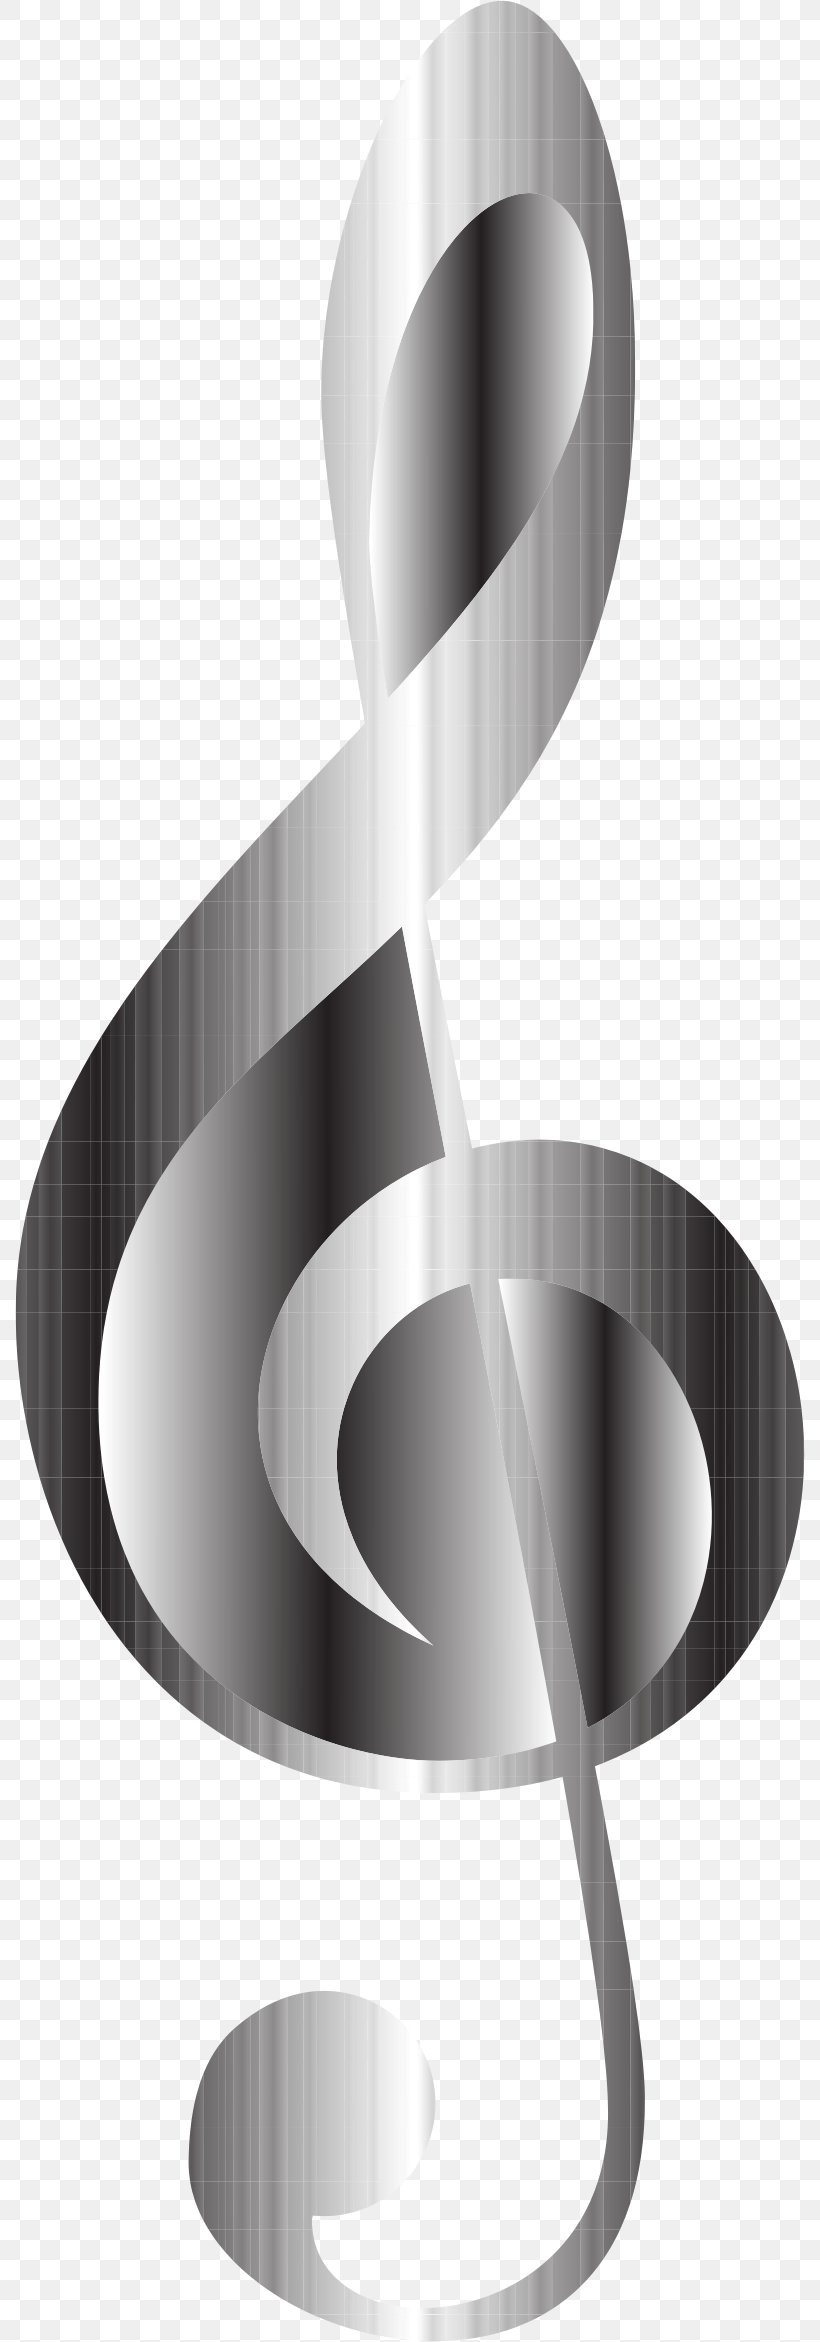 Monochrome Photography Black And White Clef Clip Art, PNG, 790x2342px, Monochrome, Black And White, Check, Checkerboard, Clef Download Free